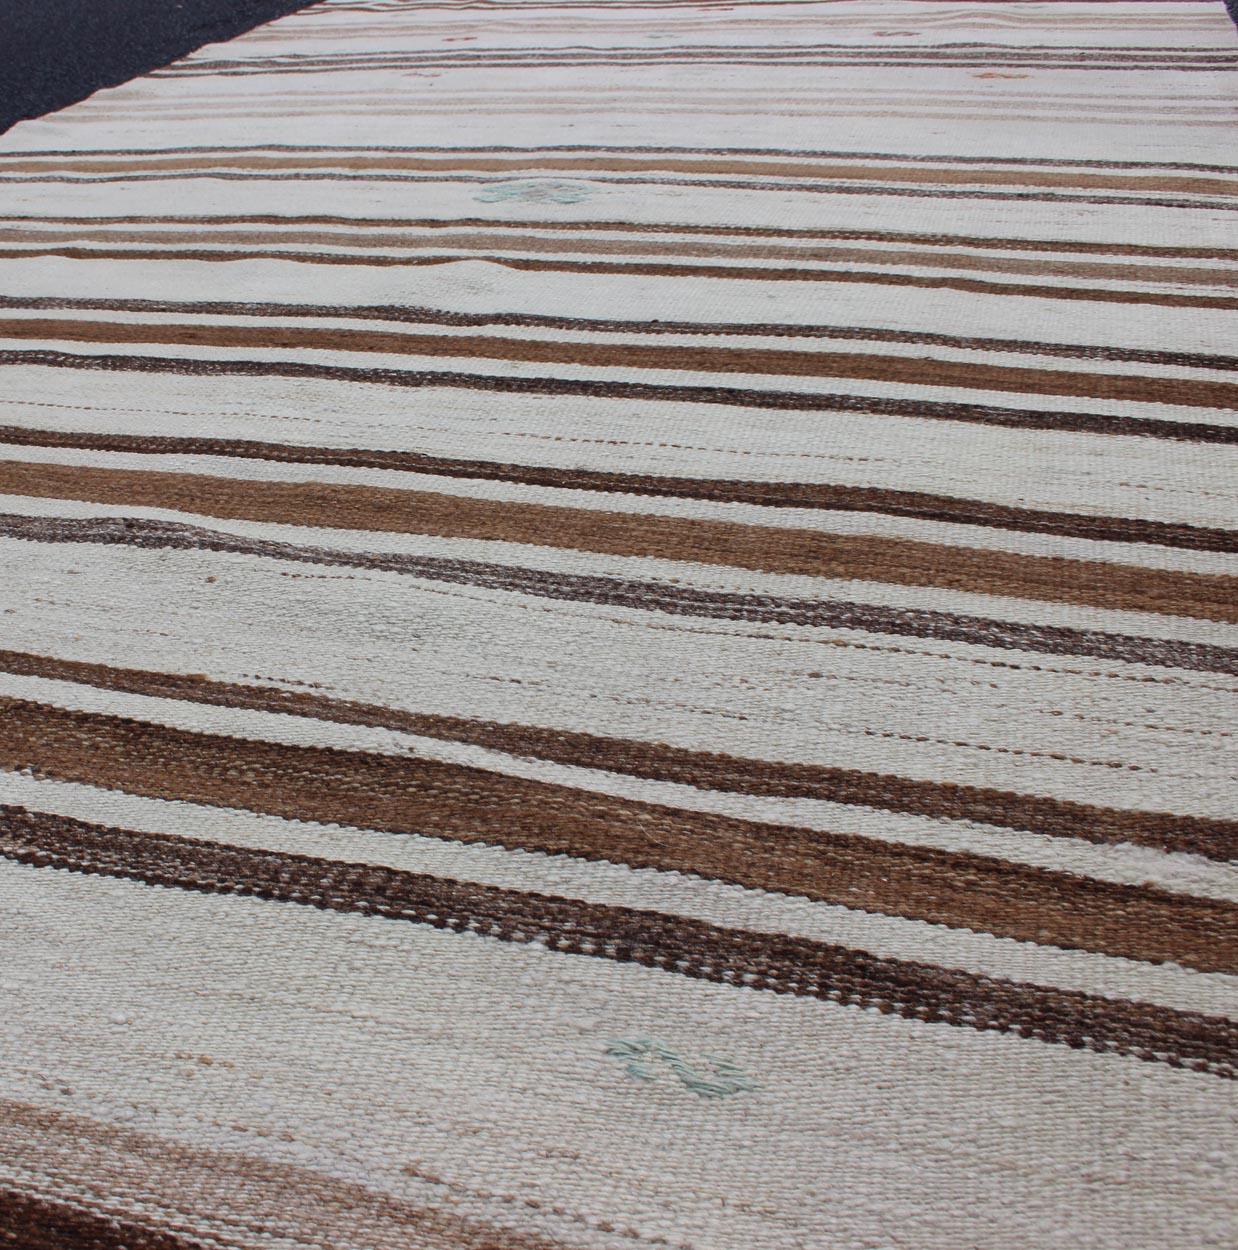 Wool Striped Turkish Vintage Kilim Flat-Weave Rug in Shades of Browns Taupe and Ivory For Sale